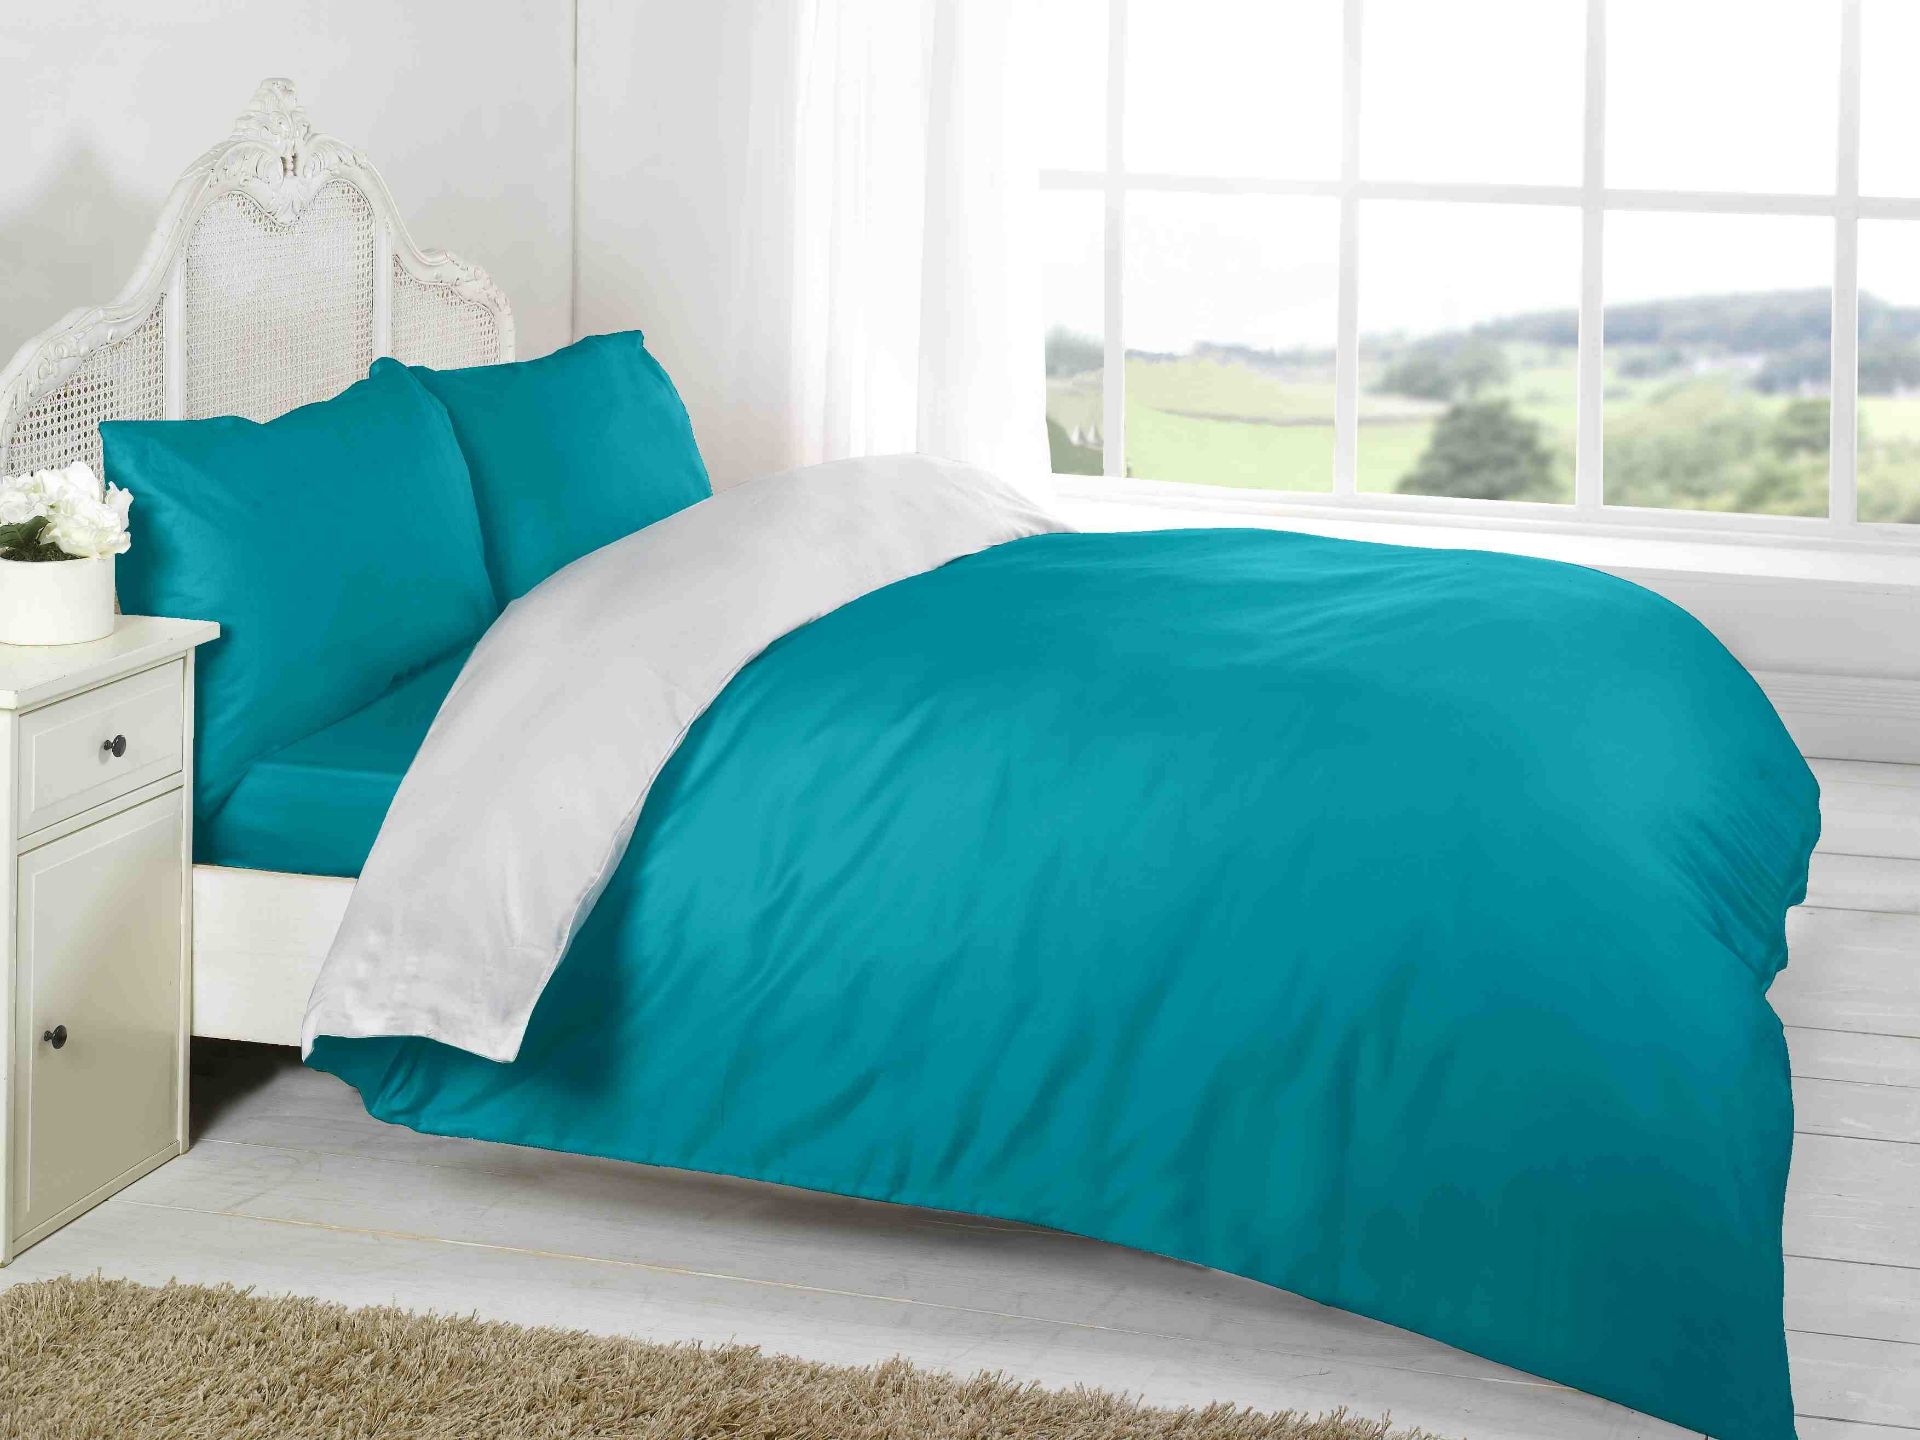 V *TRADE QTY* Brand New Double Complete Reversible Bed Set Includes 1 x Duvet Cover - 1 x Fitted